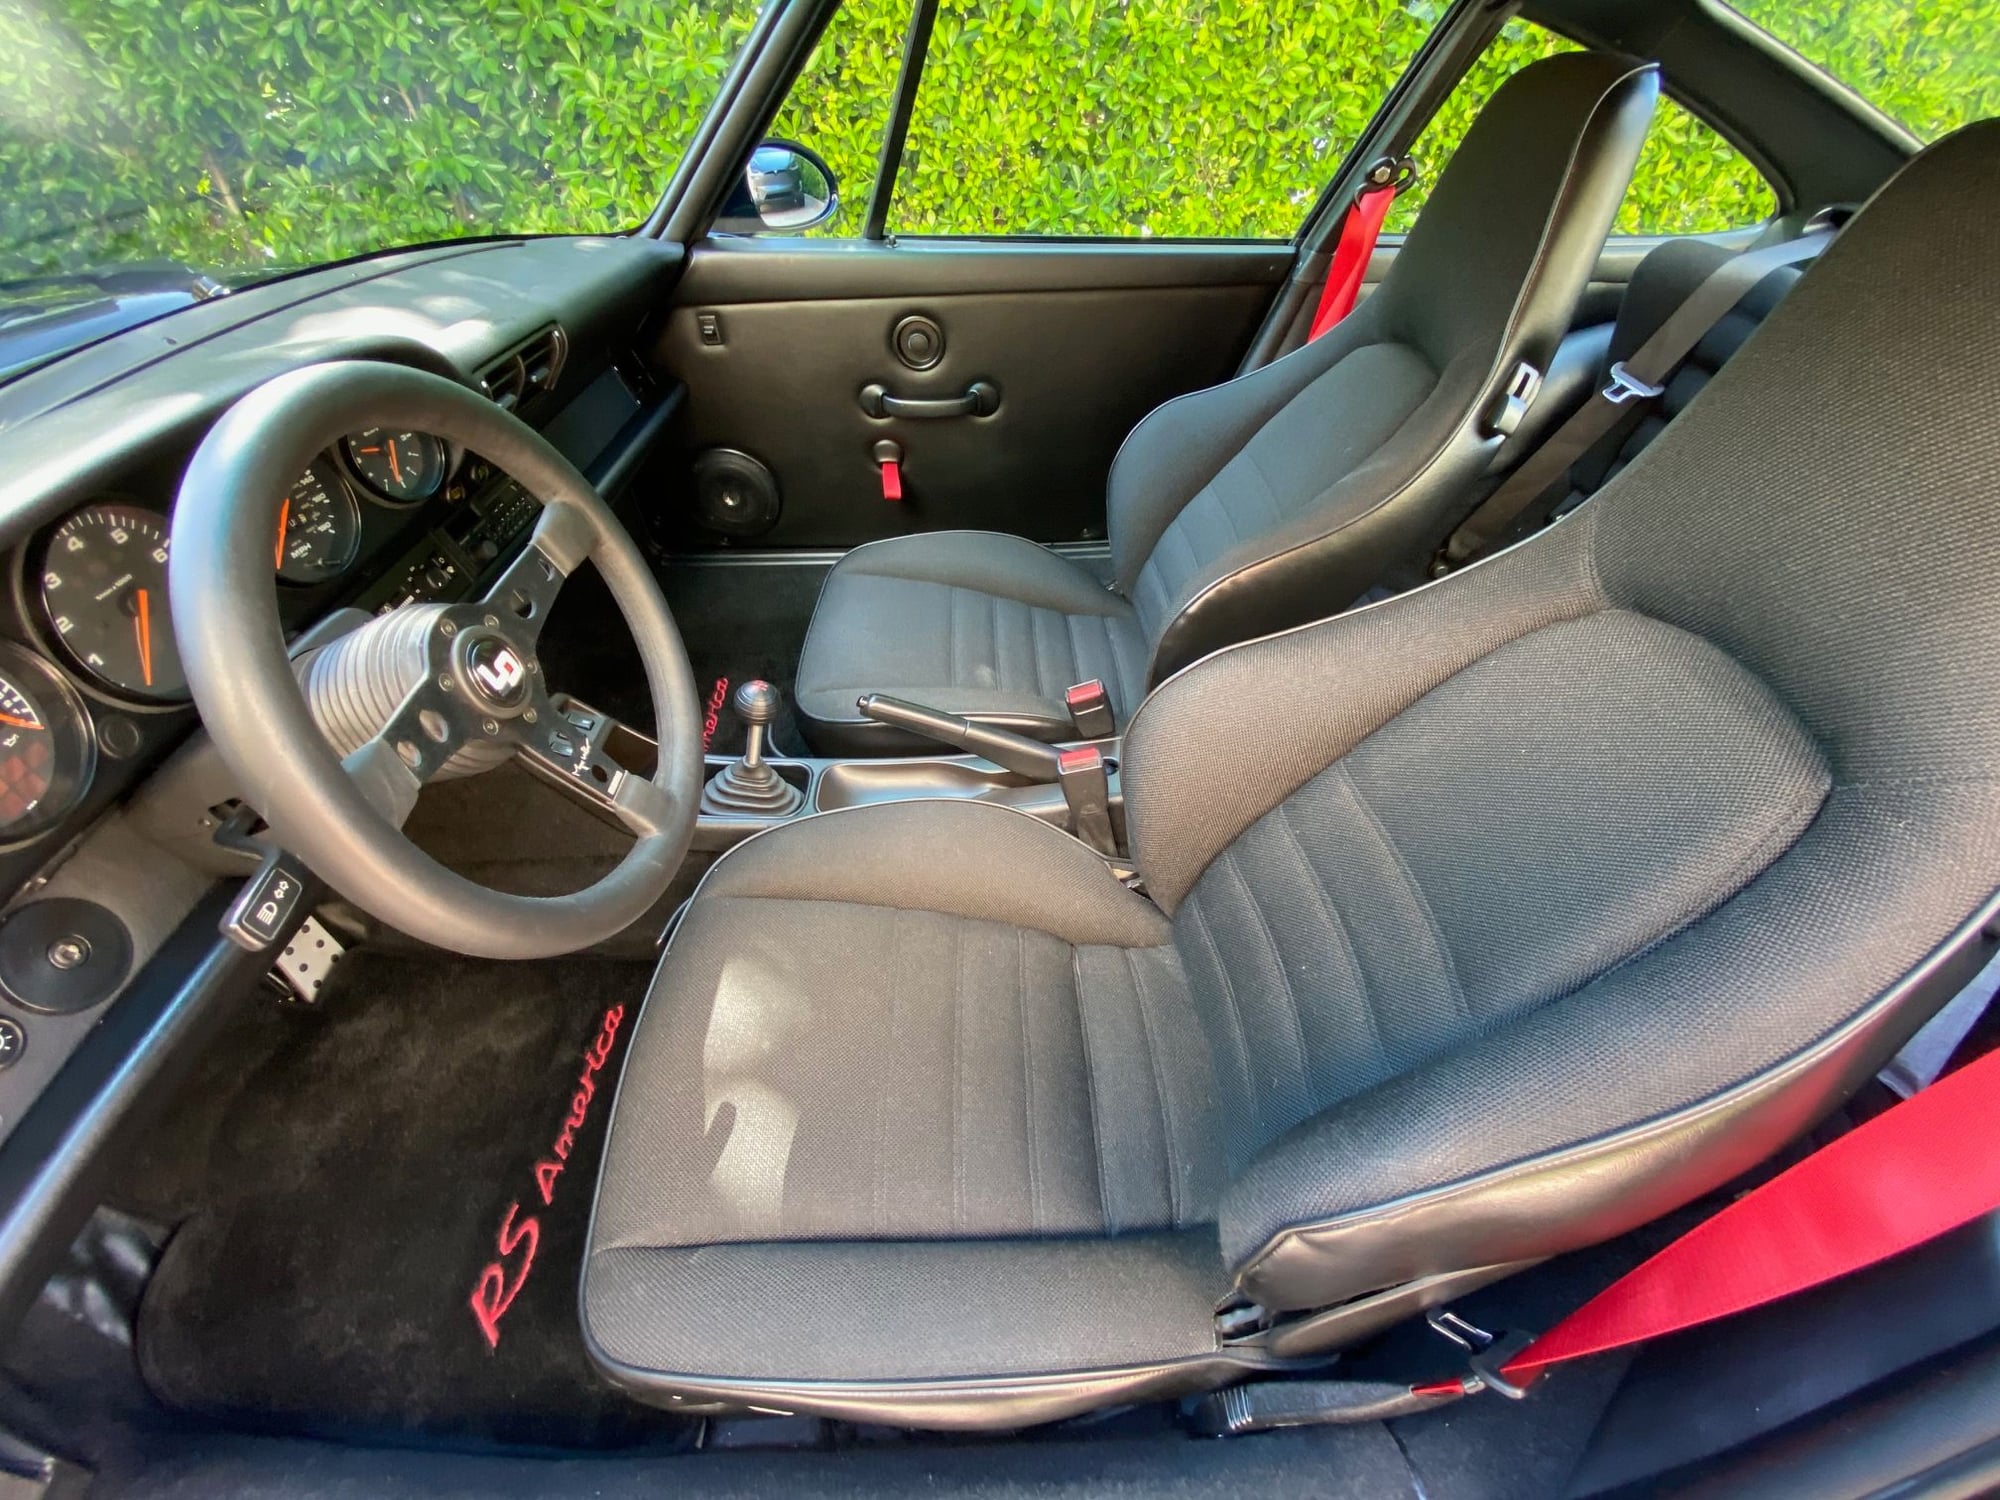 Interior/Upholstery - FS: Porsche 911 Sport Seats out of my 1994 964 RS America... - Used - Brea, CA 91709, United States